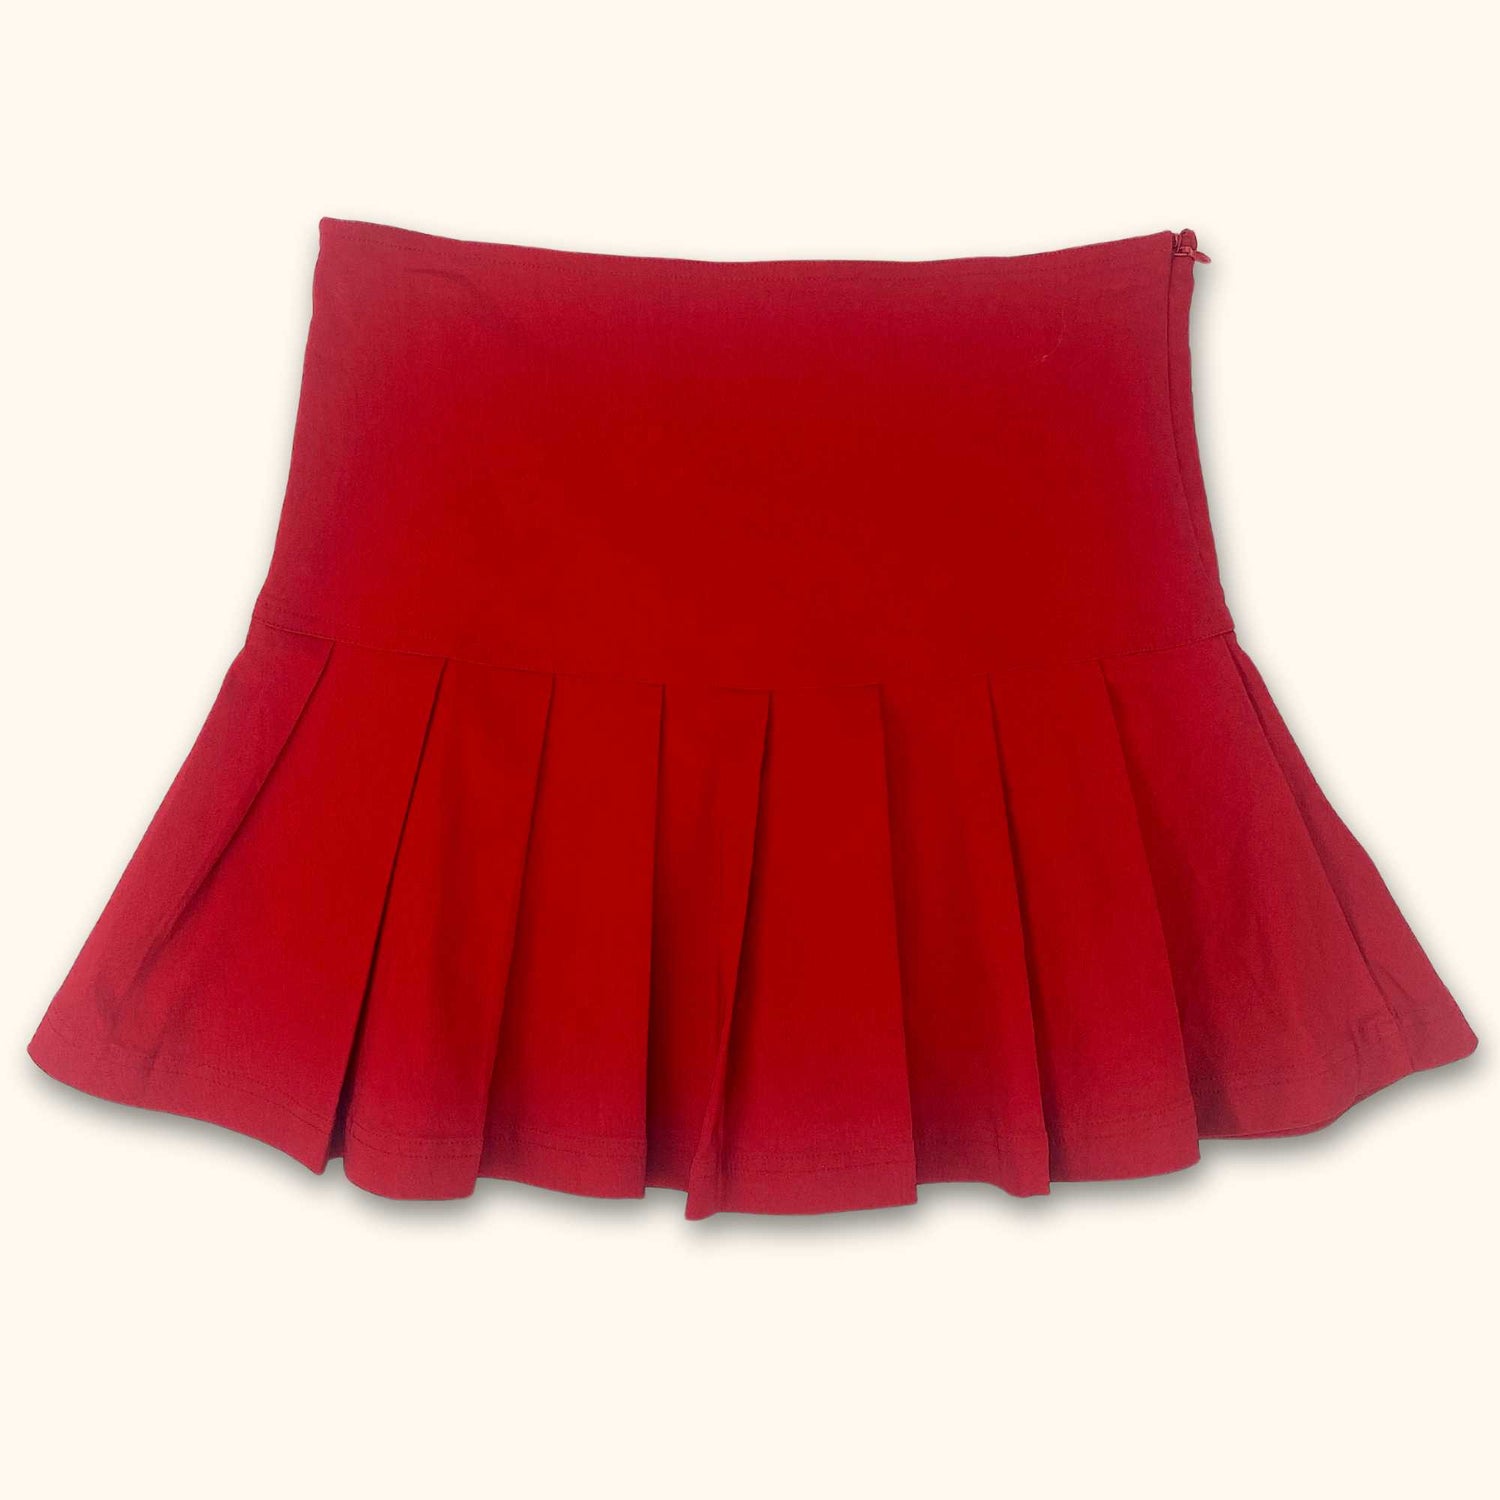 Vintage H&amp;M Pleated Skirt Red - Size XS - H&amp;M - Skirts